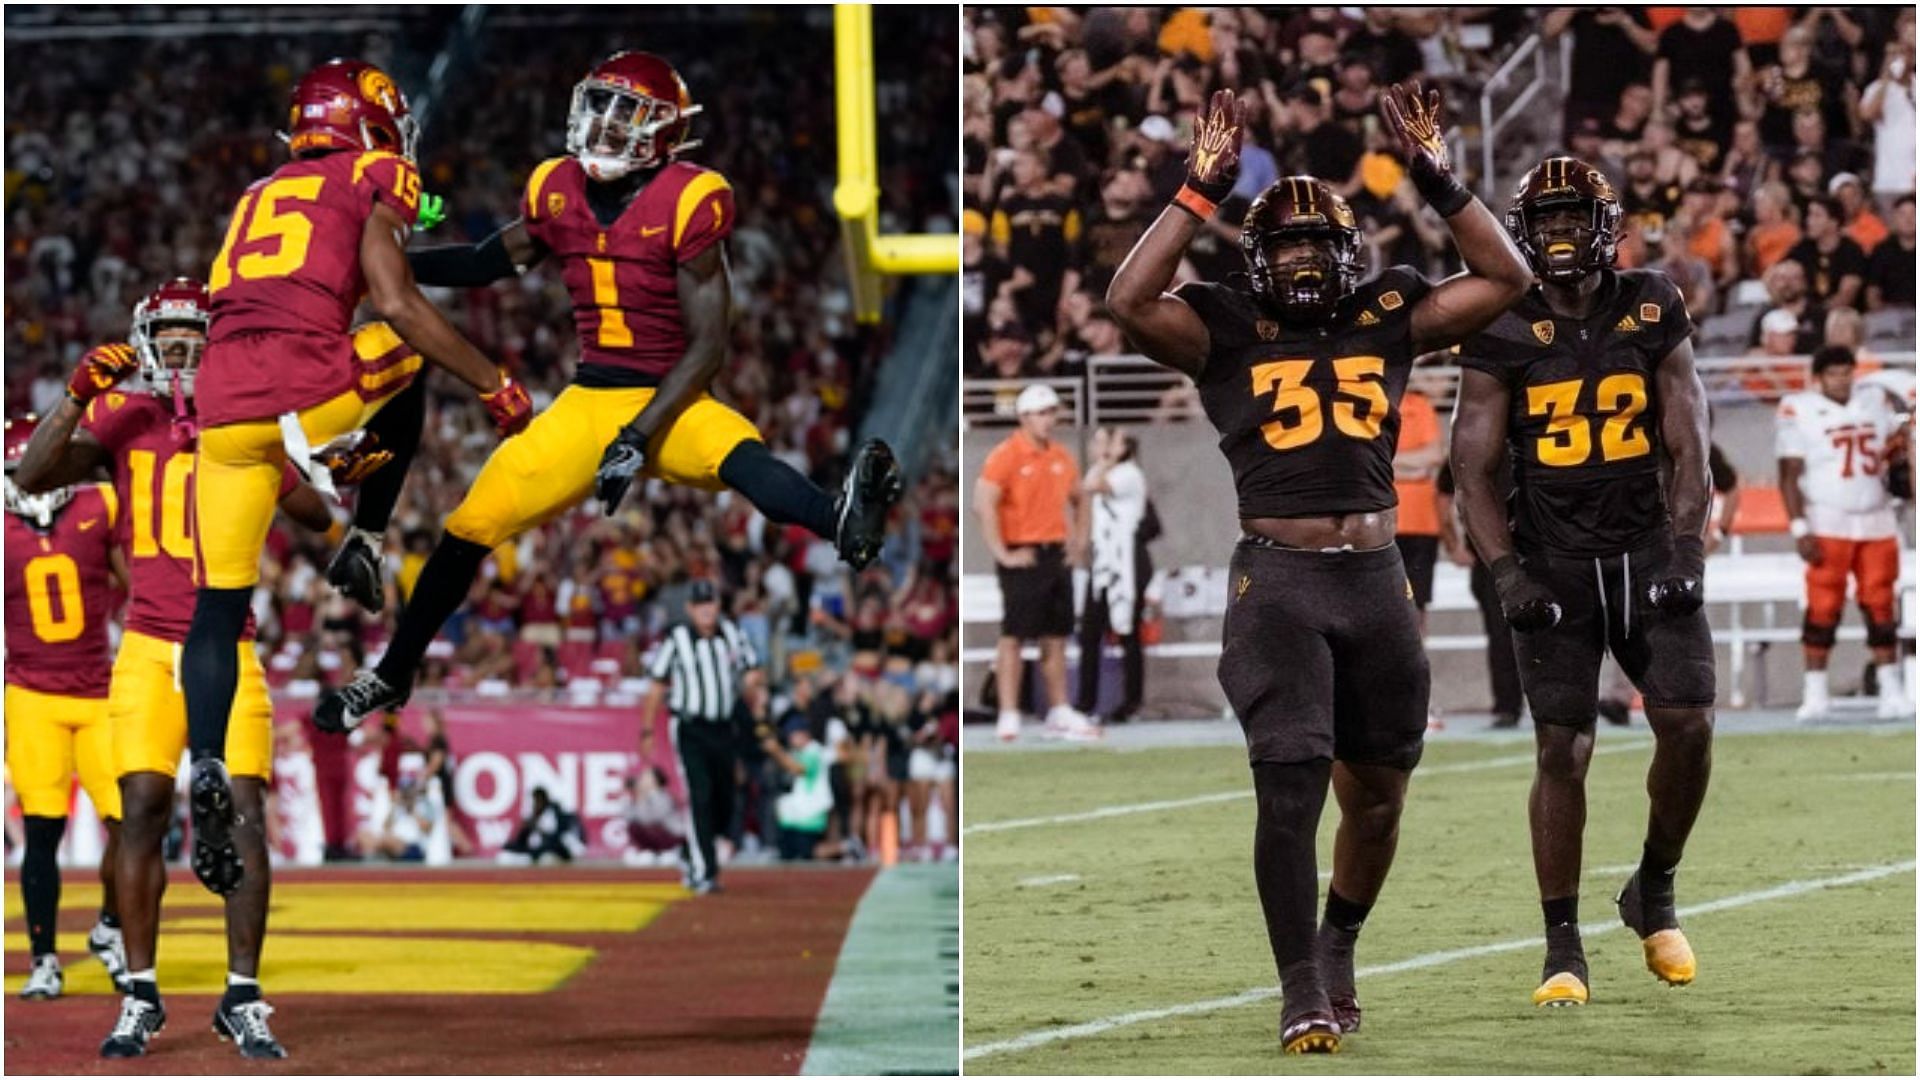 The USC Trojans are going against the Arizona State Sun Devils